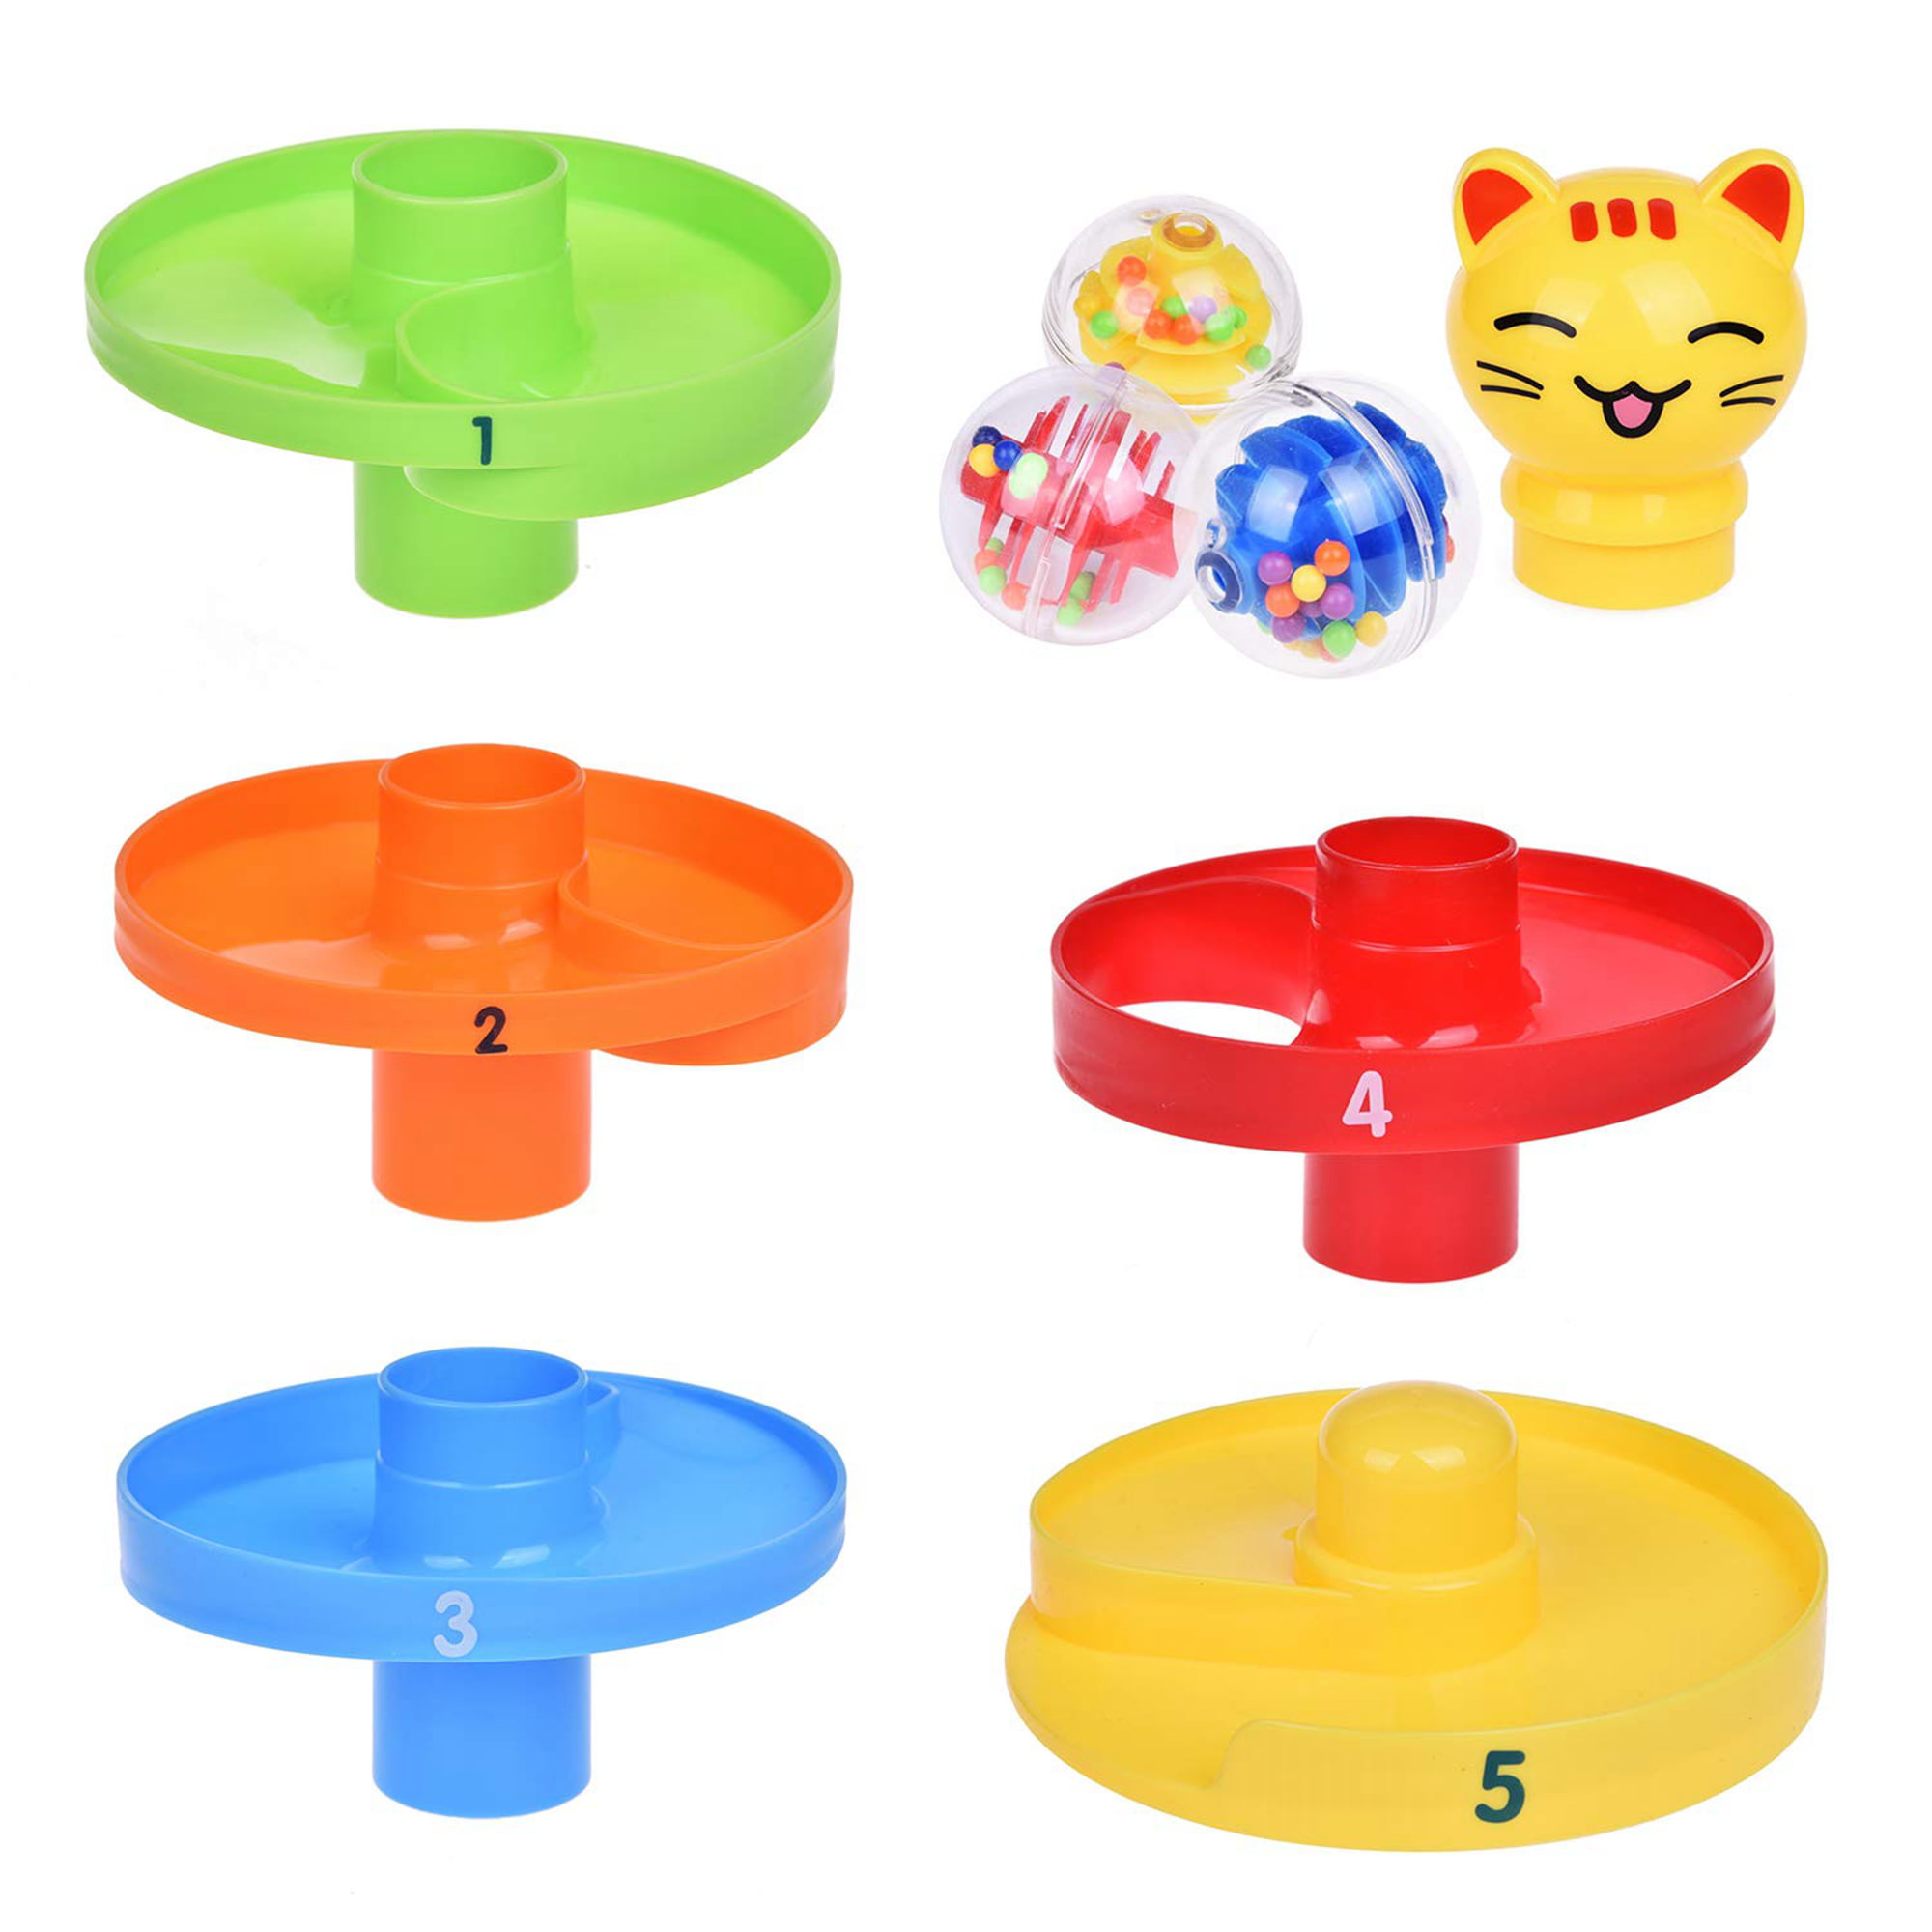 Tech Traders Swirl Ball Rolling Drop Toy Toddlers Educational Puzzle Cat, 